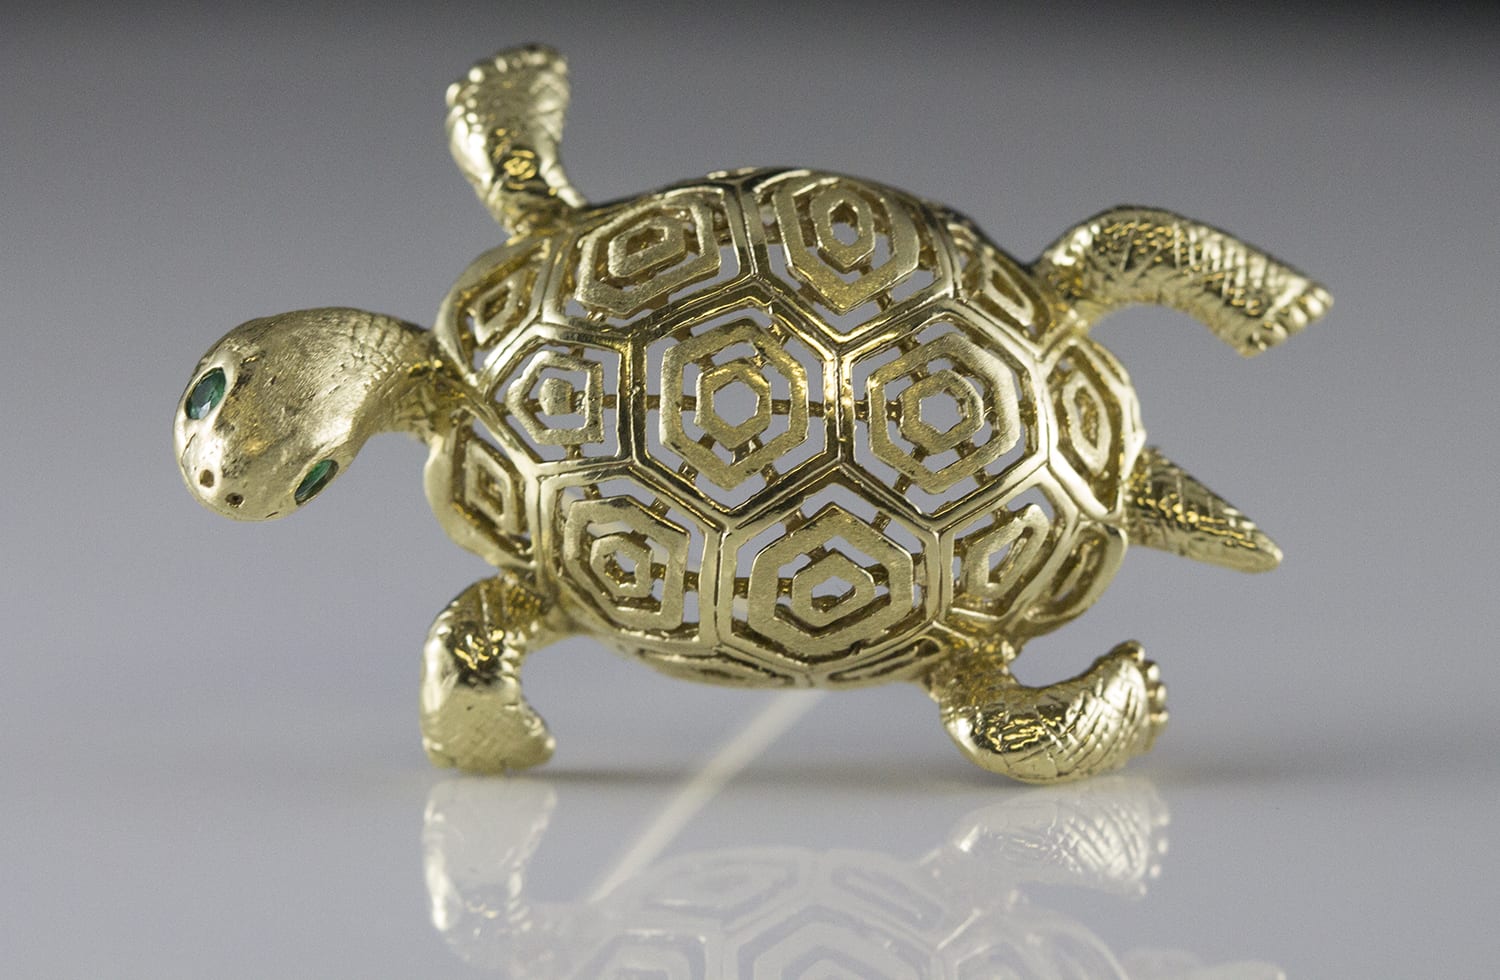 New Wall turtle brooch BHAW09